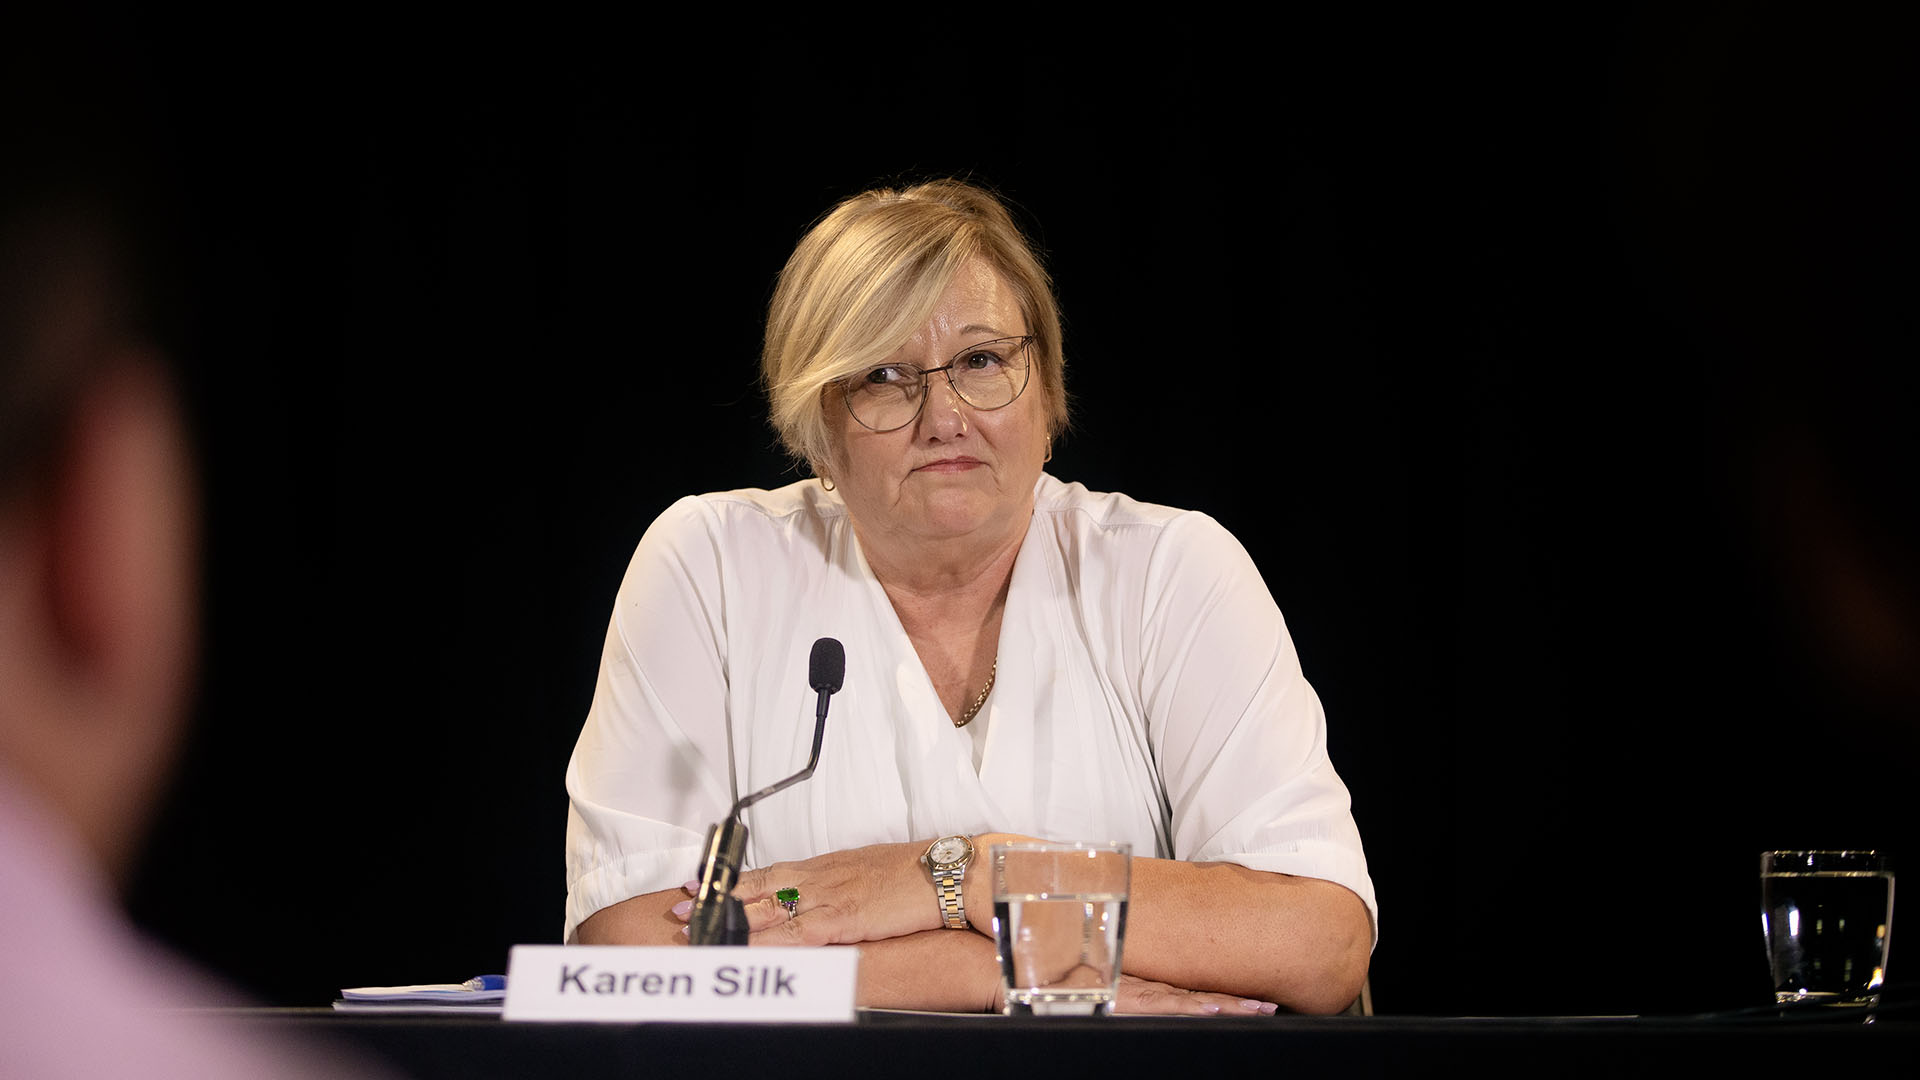 Karen Silk, Assistant Governor and General Manager of Economics, Financial Markets and Banking at the Reserve Bank of New Zealand